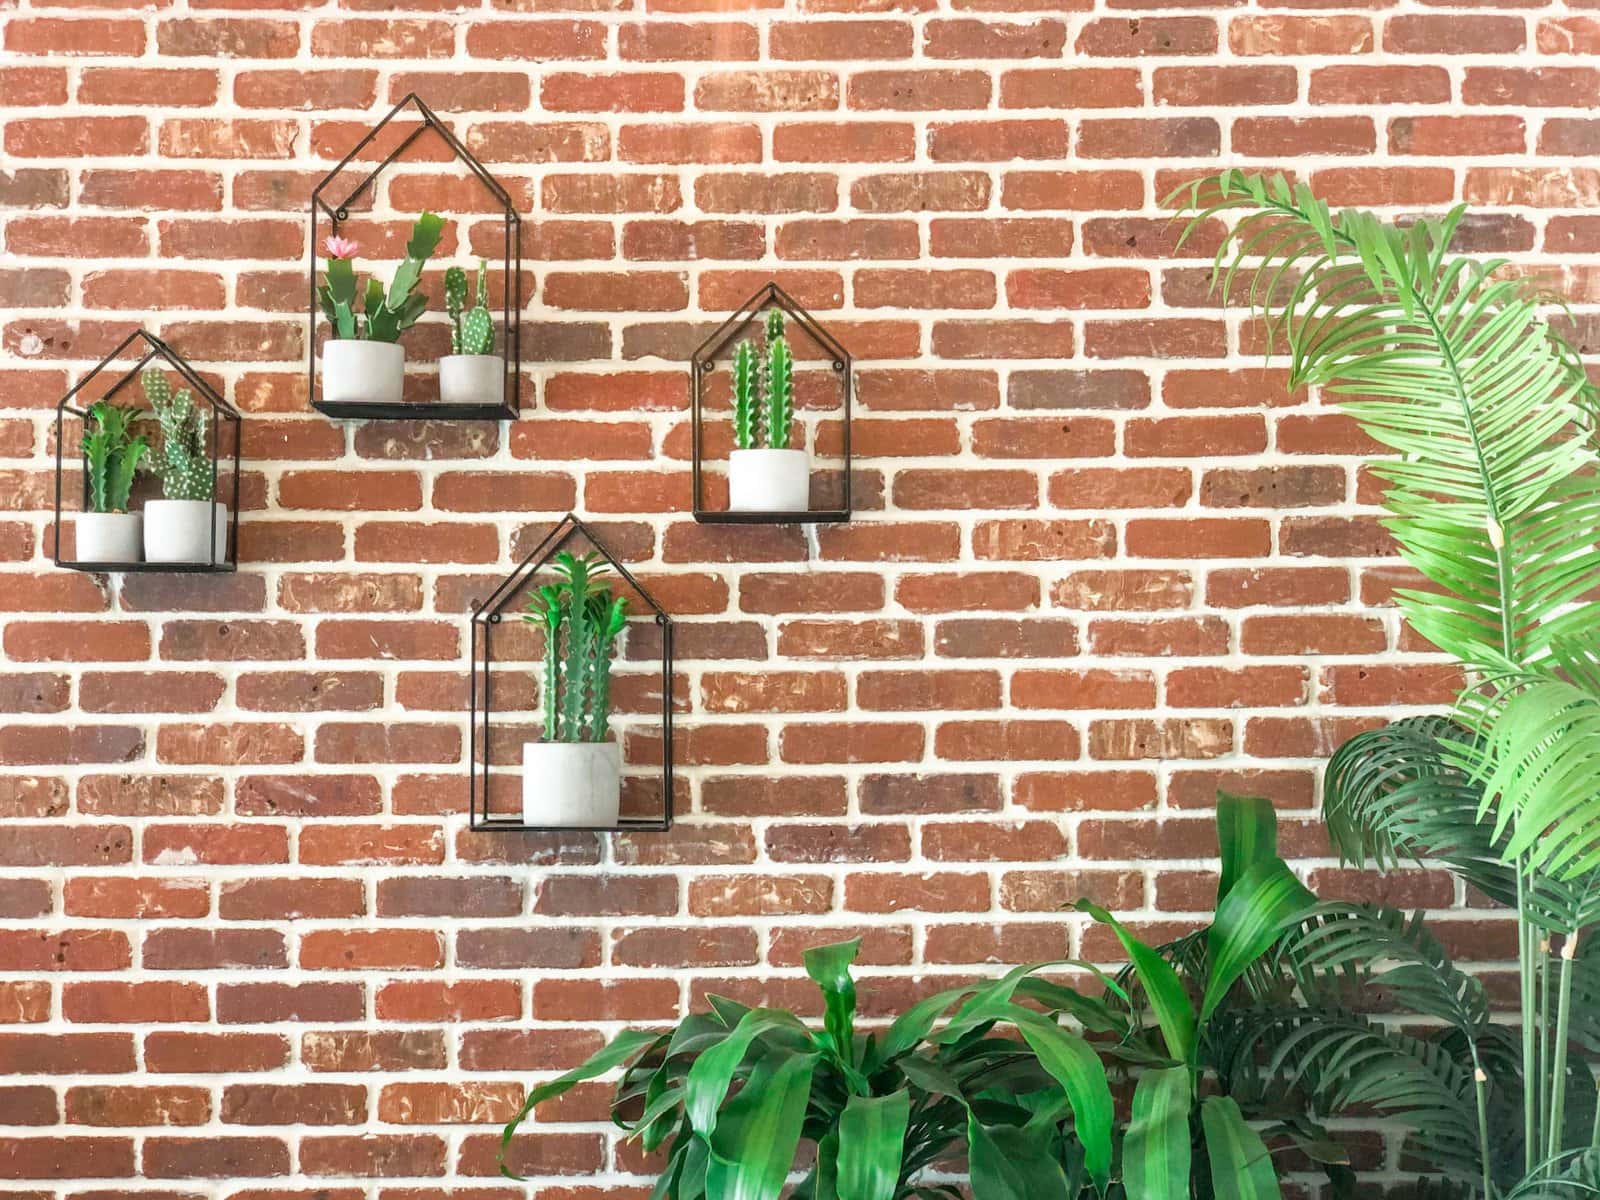 Indoor plants decorating: Brick wall with wall-mounted plant pot holders